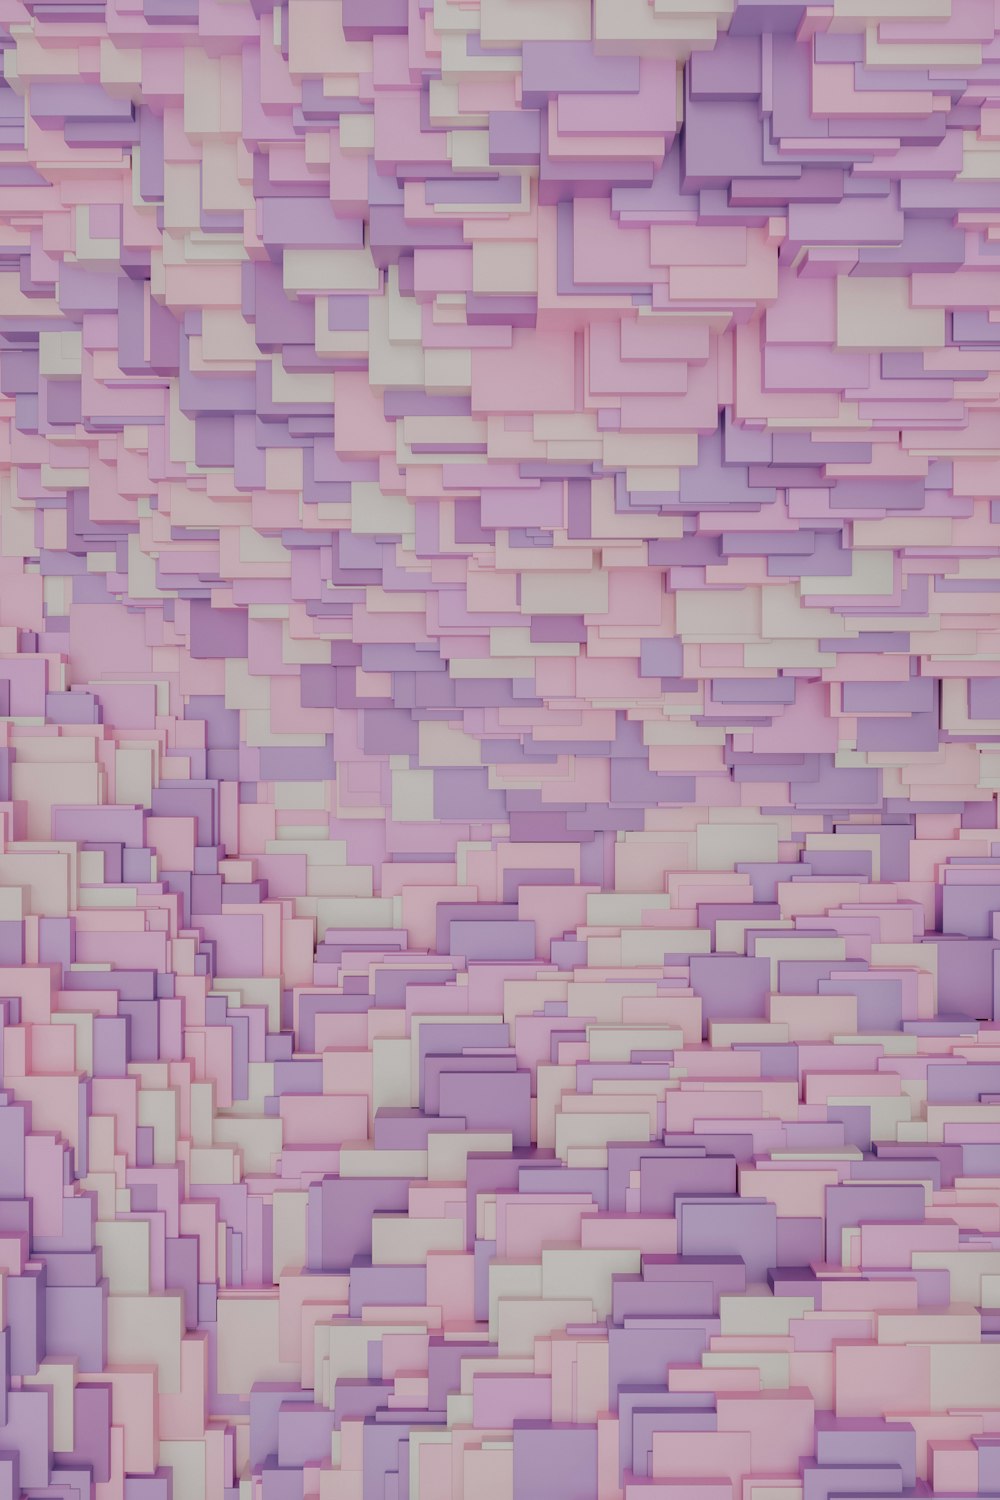 a very large amount of purple squares on a pink background